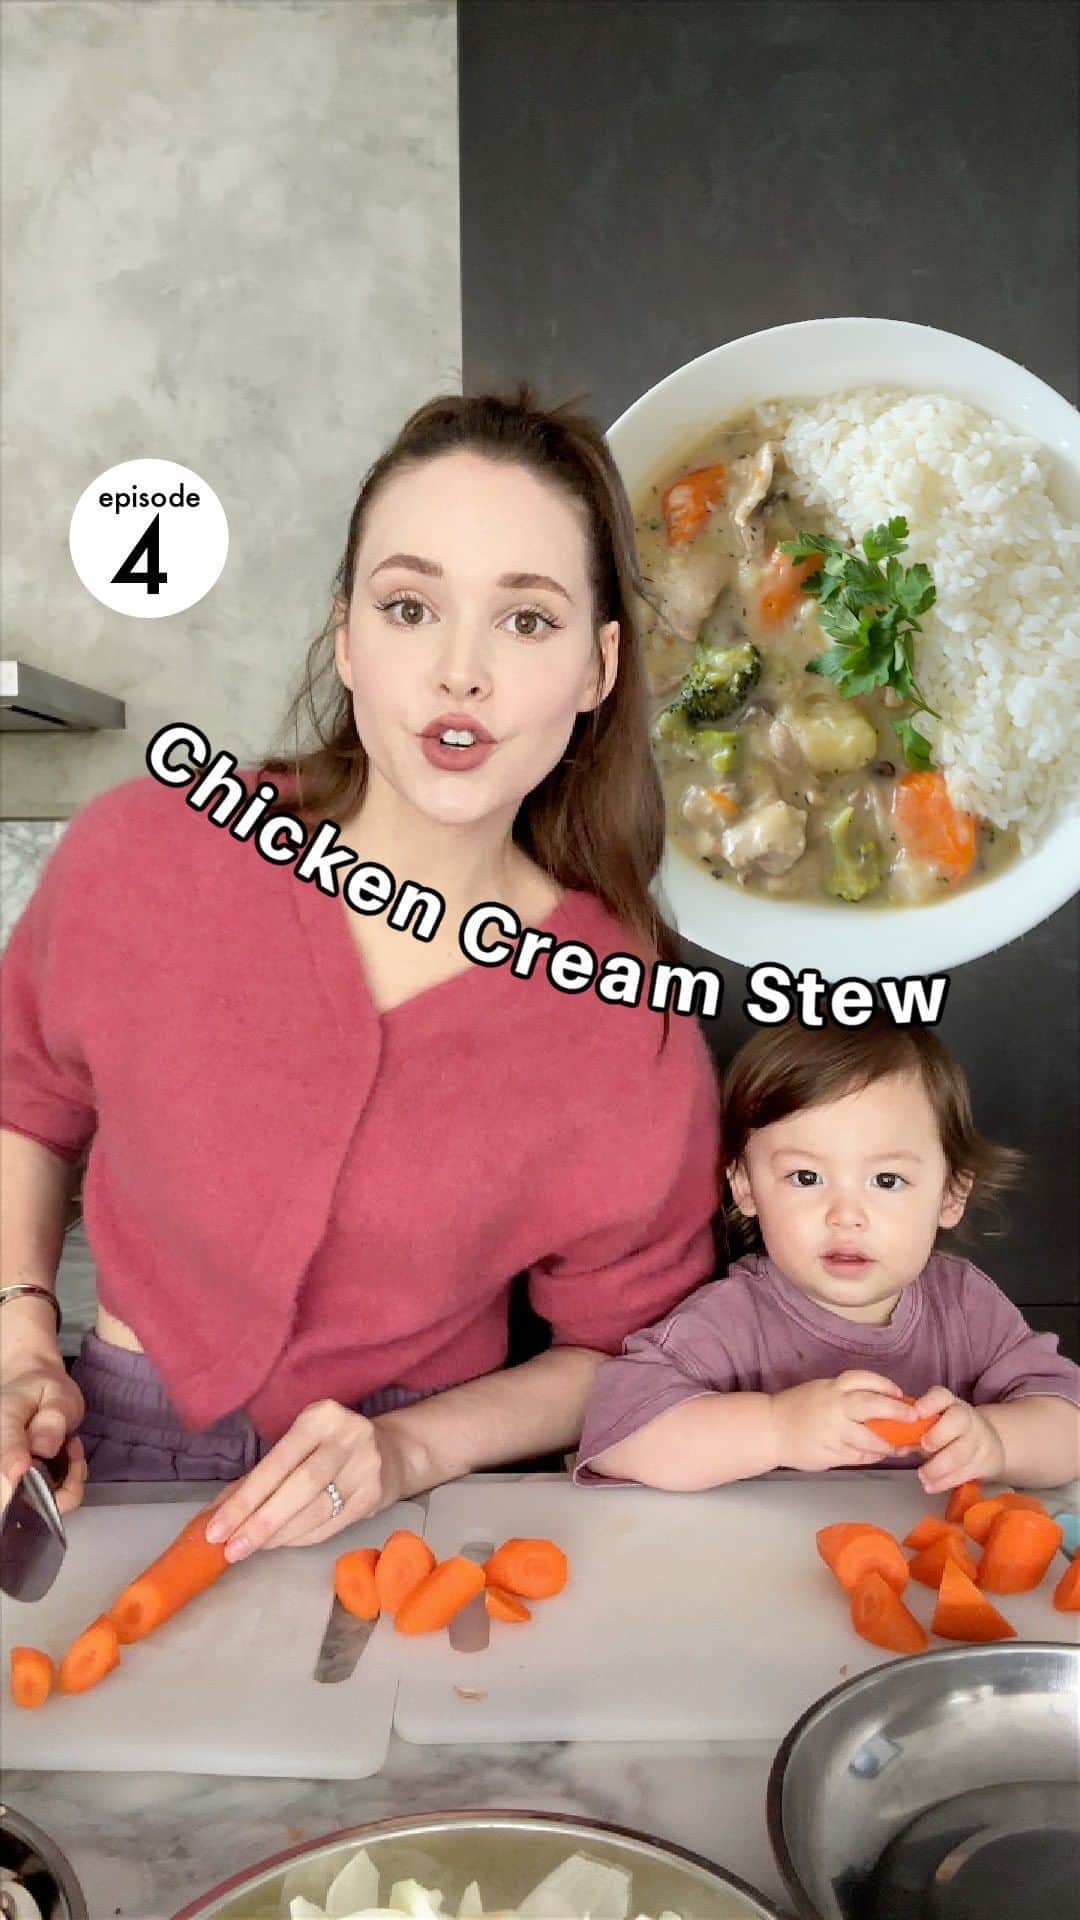 テイラーRのインスタグラム：「This recipe is a blend of the chicken & biscuits dish I eat at home in Canada and the stews I‘ve eaten in Asia (Japan/Hong Kong). It really satisfies my multicultural family, making it *episode 4* of my Easy Toddler-Approved Whole Family Recipes.  Chicken Cream Stew Ingredients *400g skinless boneless chicken thighs, chopped into bite sized pieces *1 white onion, cut into wedges *2 medium carrots, cut into bite sized pieces  *3-4 potatoes, cut into bite sized pieces (yukon gold is best) *6 cremini mushrooms, sliced *1 head of broccoli, chopped into bite sized pieces *2 garlic cloves, minced *1 tbsp of extra virgin olive oil *1 tbsp butter *3 tbsp all purpose flour  *1/2 tsp salt (optional, I didn’t put it) *1 tsp black pepper *1/2 tsp dried thyme *1/4 tsp ground sage *1/8 tsp ground nutmeg *2.5 cups of chicken broth or chicken bone broth *1 cup of cream (or whole milk) *2 bay leaves  Method: 1. prepare all vegetables, chicken, and seasonings 2. add the olive oil to a pot and cook chicken until it is 80% done over medium heat. I did this in batches so I didn’t overcrowd the pan. Set it to the side. 3. Melt the butter then add the mushrooms and sautee until golden brown (you don’t have to but if you have time they taste much better this way IMO). 4. Add the onion and sautee it until it’s transleucent 5. add the garlic, salt, pepper, thyme, sage, and nutmeg then sautee it for a minute 6. add poatoes and carrots, sautee to coat them in the oil, butter, and seasoning 7. spinkle in the flour and sautee until it isn’t raw 8. add in alternating splashes of chicken broth and cream. scrap the bottom of the pot to get the yummy browned bits mixed in. If you like the stew more watery you can add more liquid (chicken broth or water &/or cream).  9. add 2 bay leaves 10. cover and simmer on medium/low heat until the carrots and potatoes are soft. 11. add the broccoli and cook for another 5 minuted (or until your desired texture). 12. serve on it’s own, with bread or biscuits, or rice. *you can use whatever veggies you like really. Celery instead of broccoli is also good. You don’t have to use mushrooms.  #stewseason #chickencreamstew #wholefamilyrecipe #toddlerapprovedrecipes」